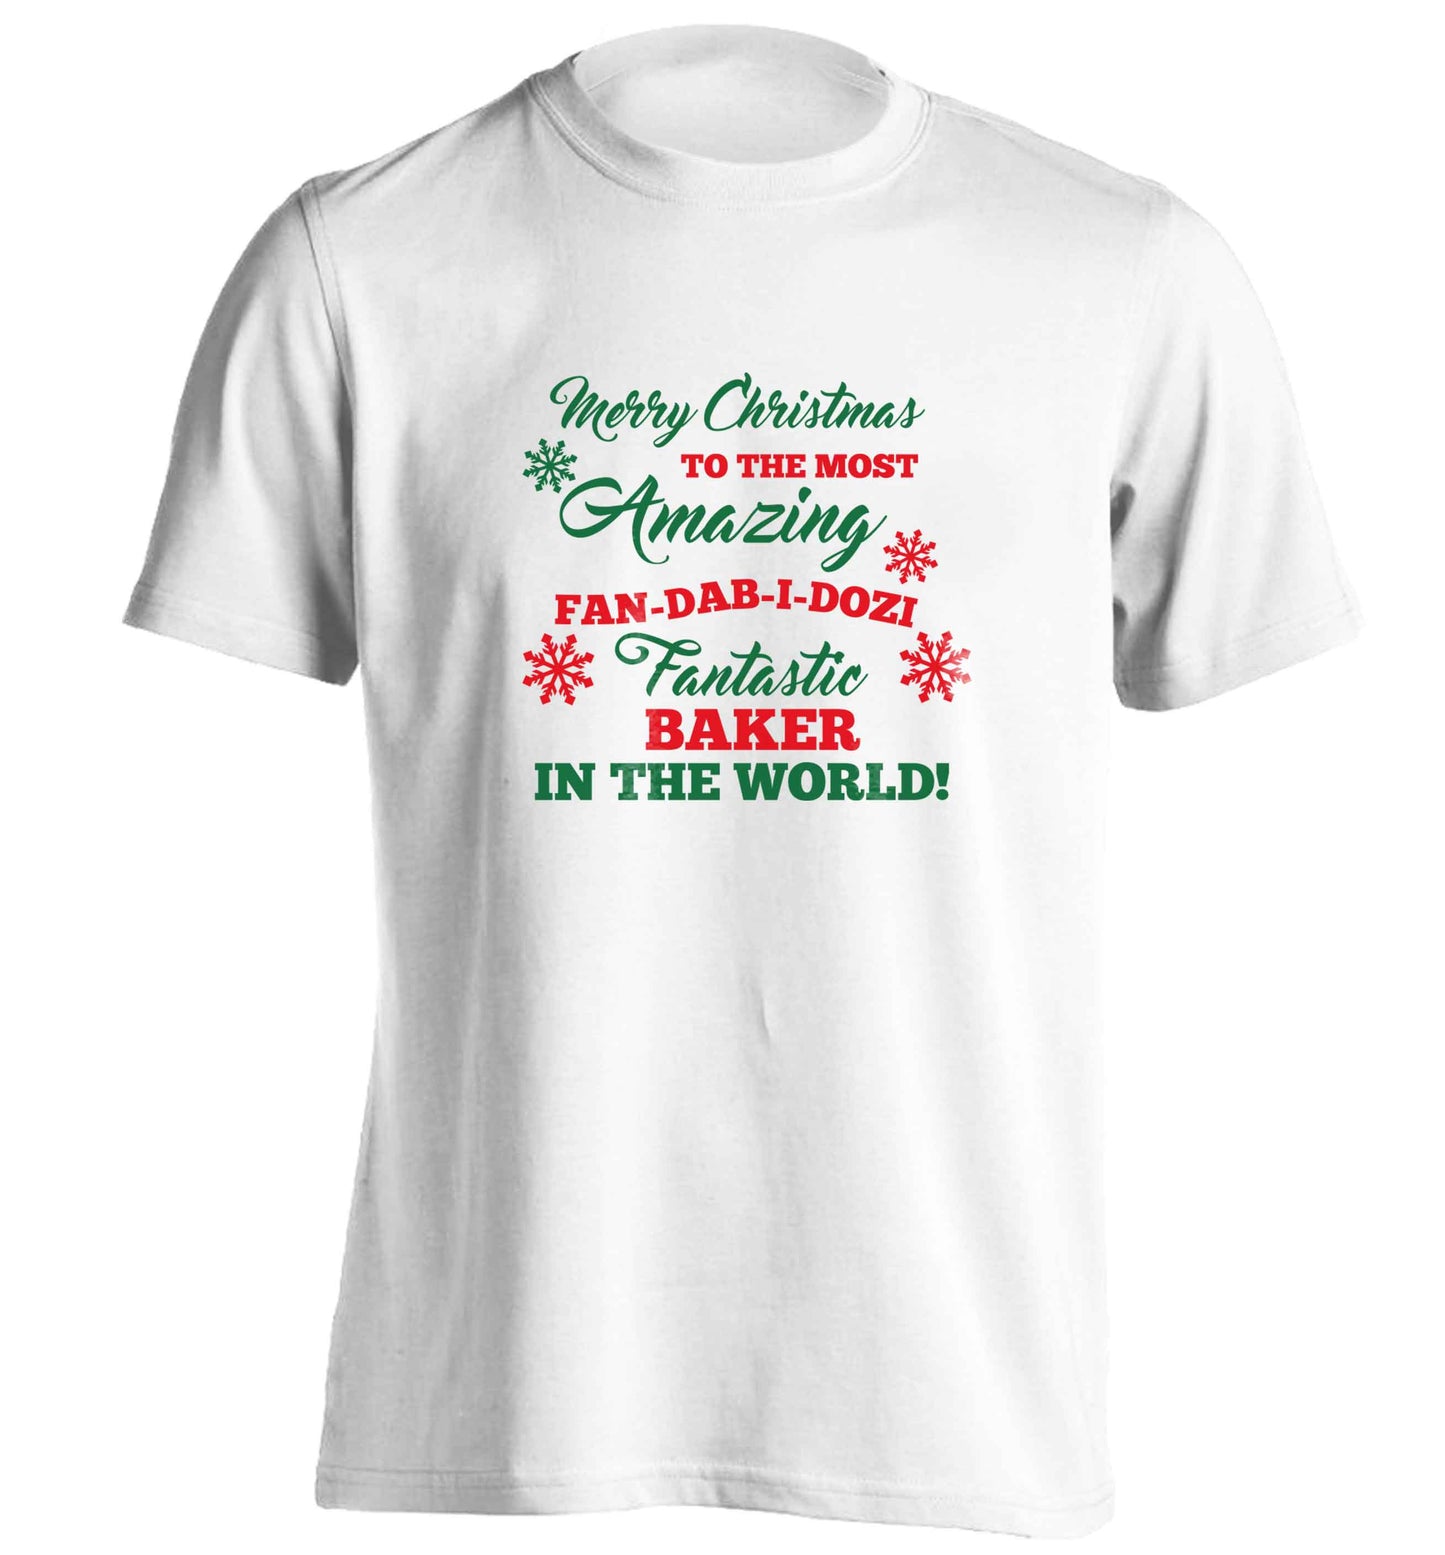 Merry Christmas to the most amazing baker in the world! adults unisex white Tshirt 2XL